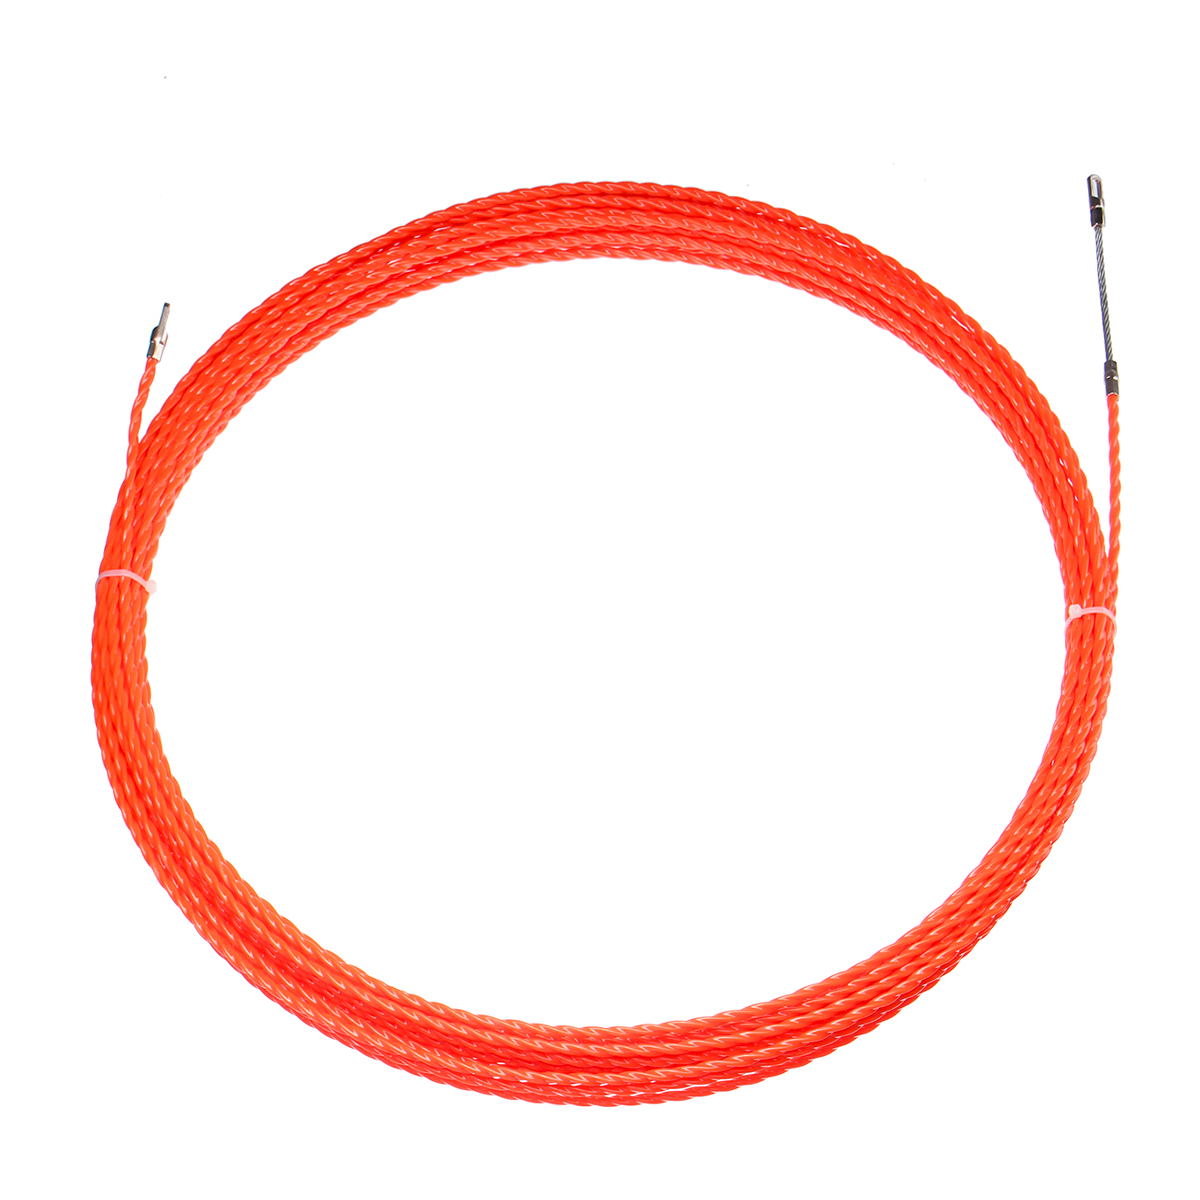 10M20M30M-Dia-5mm-Cable-Puller-Fish-Tape-Reel-Conduit-Ducting-Rodder-Pulling-Puller-1392079-3